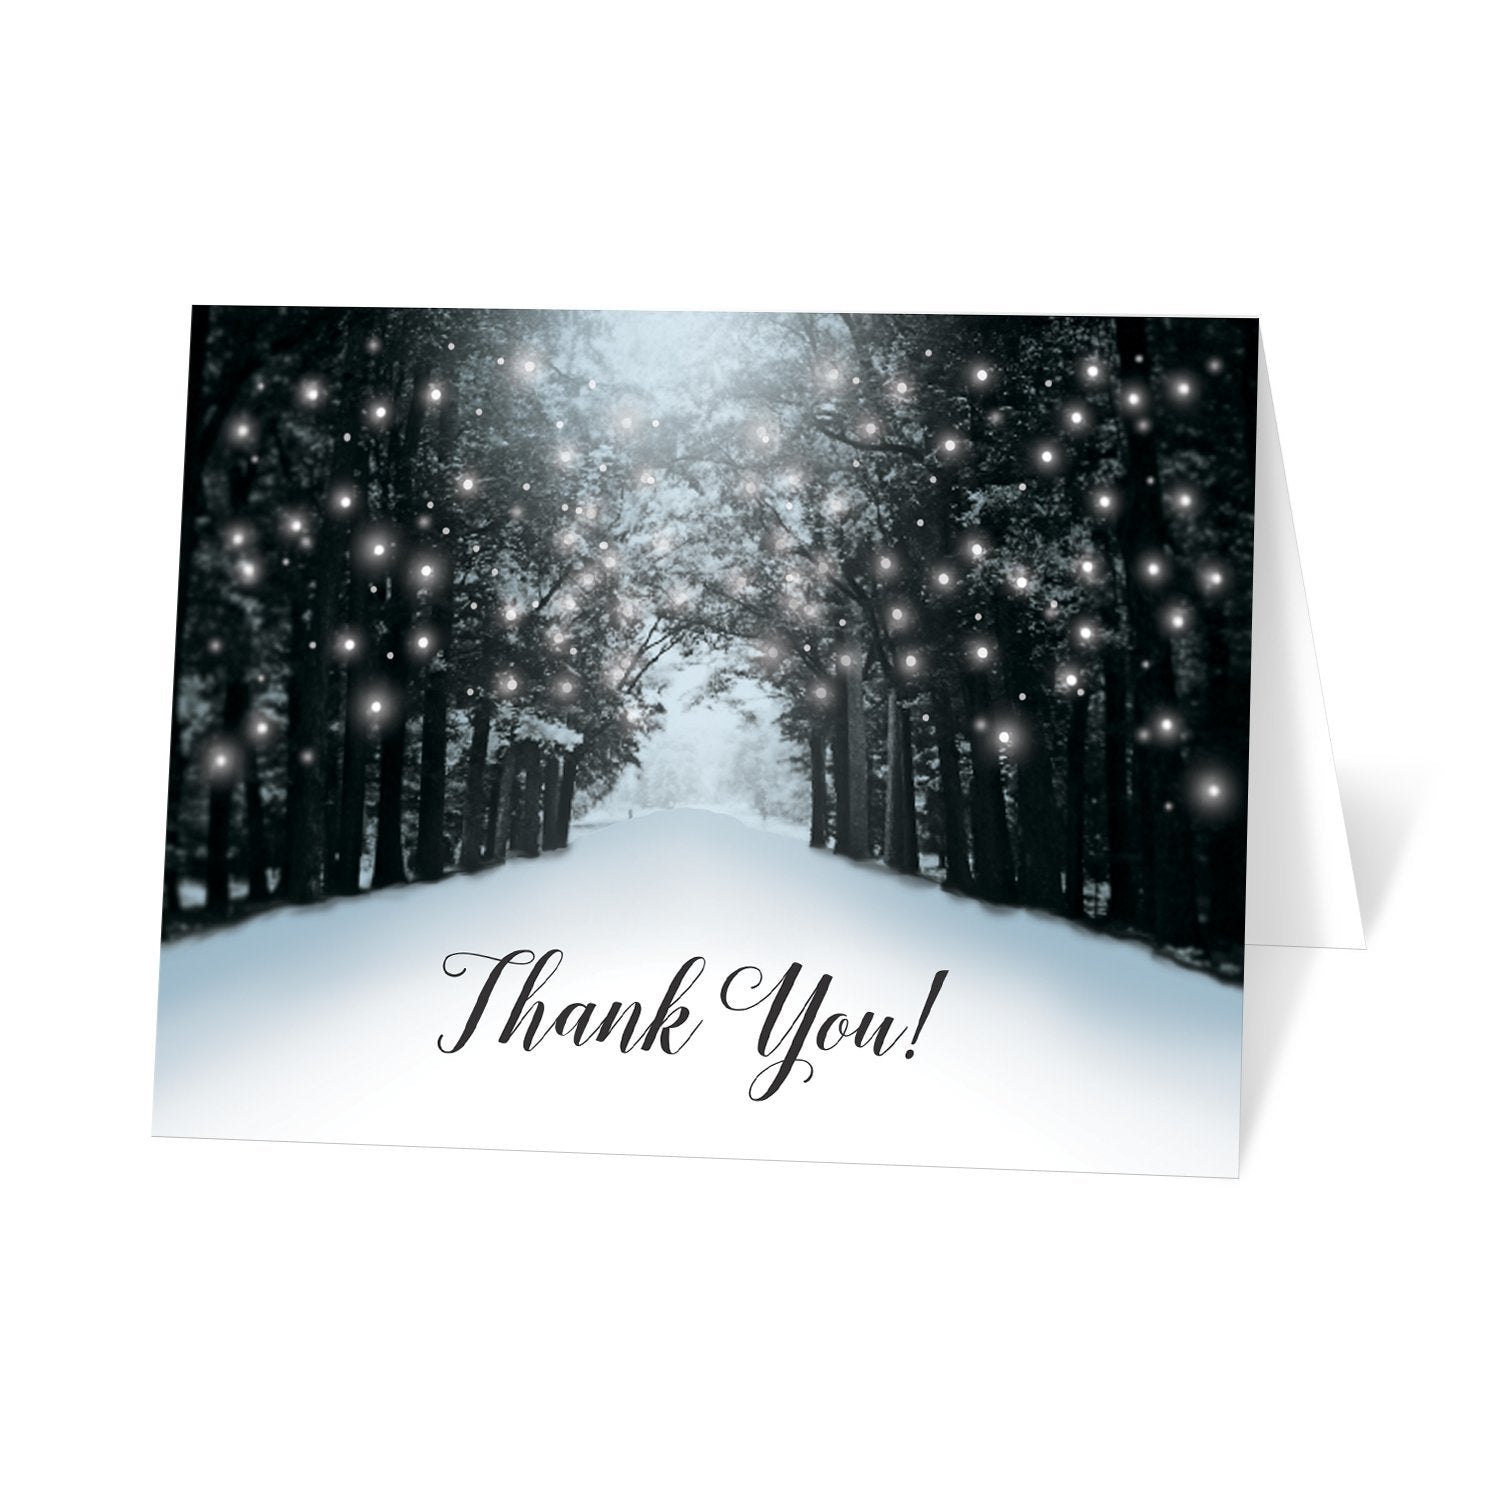 Snowy Winter Road Tree Lights Thank You cards at Artistically Invited. Snowy winter road tree lights thank you cards with a snowy tree lined road filled with white holiday lights. "Thank You!" is printed in a black script font below the design over a snow white background.